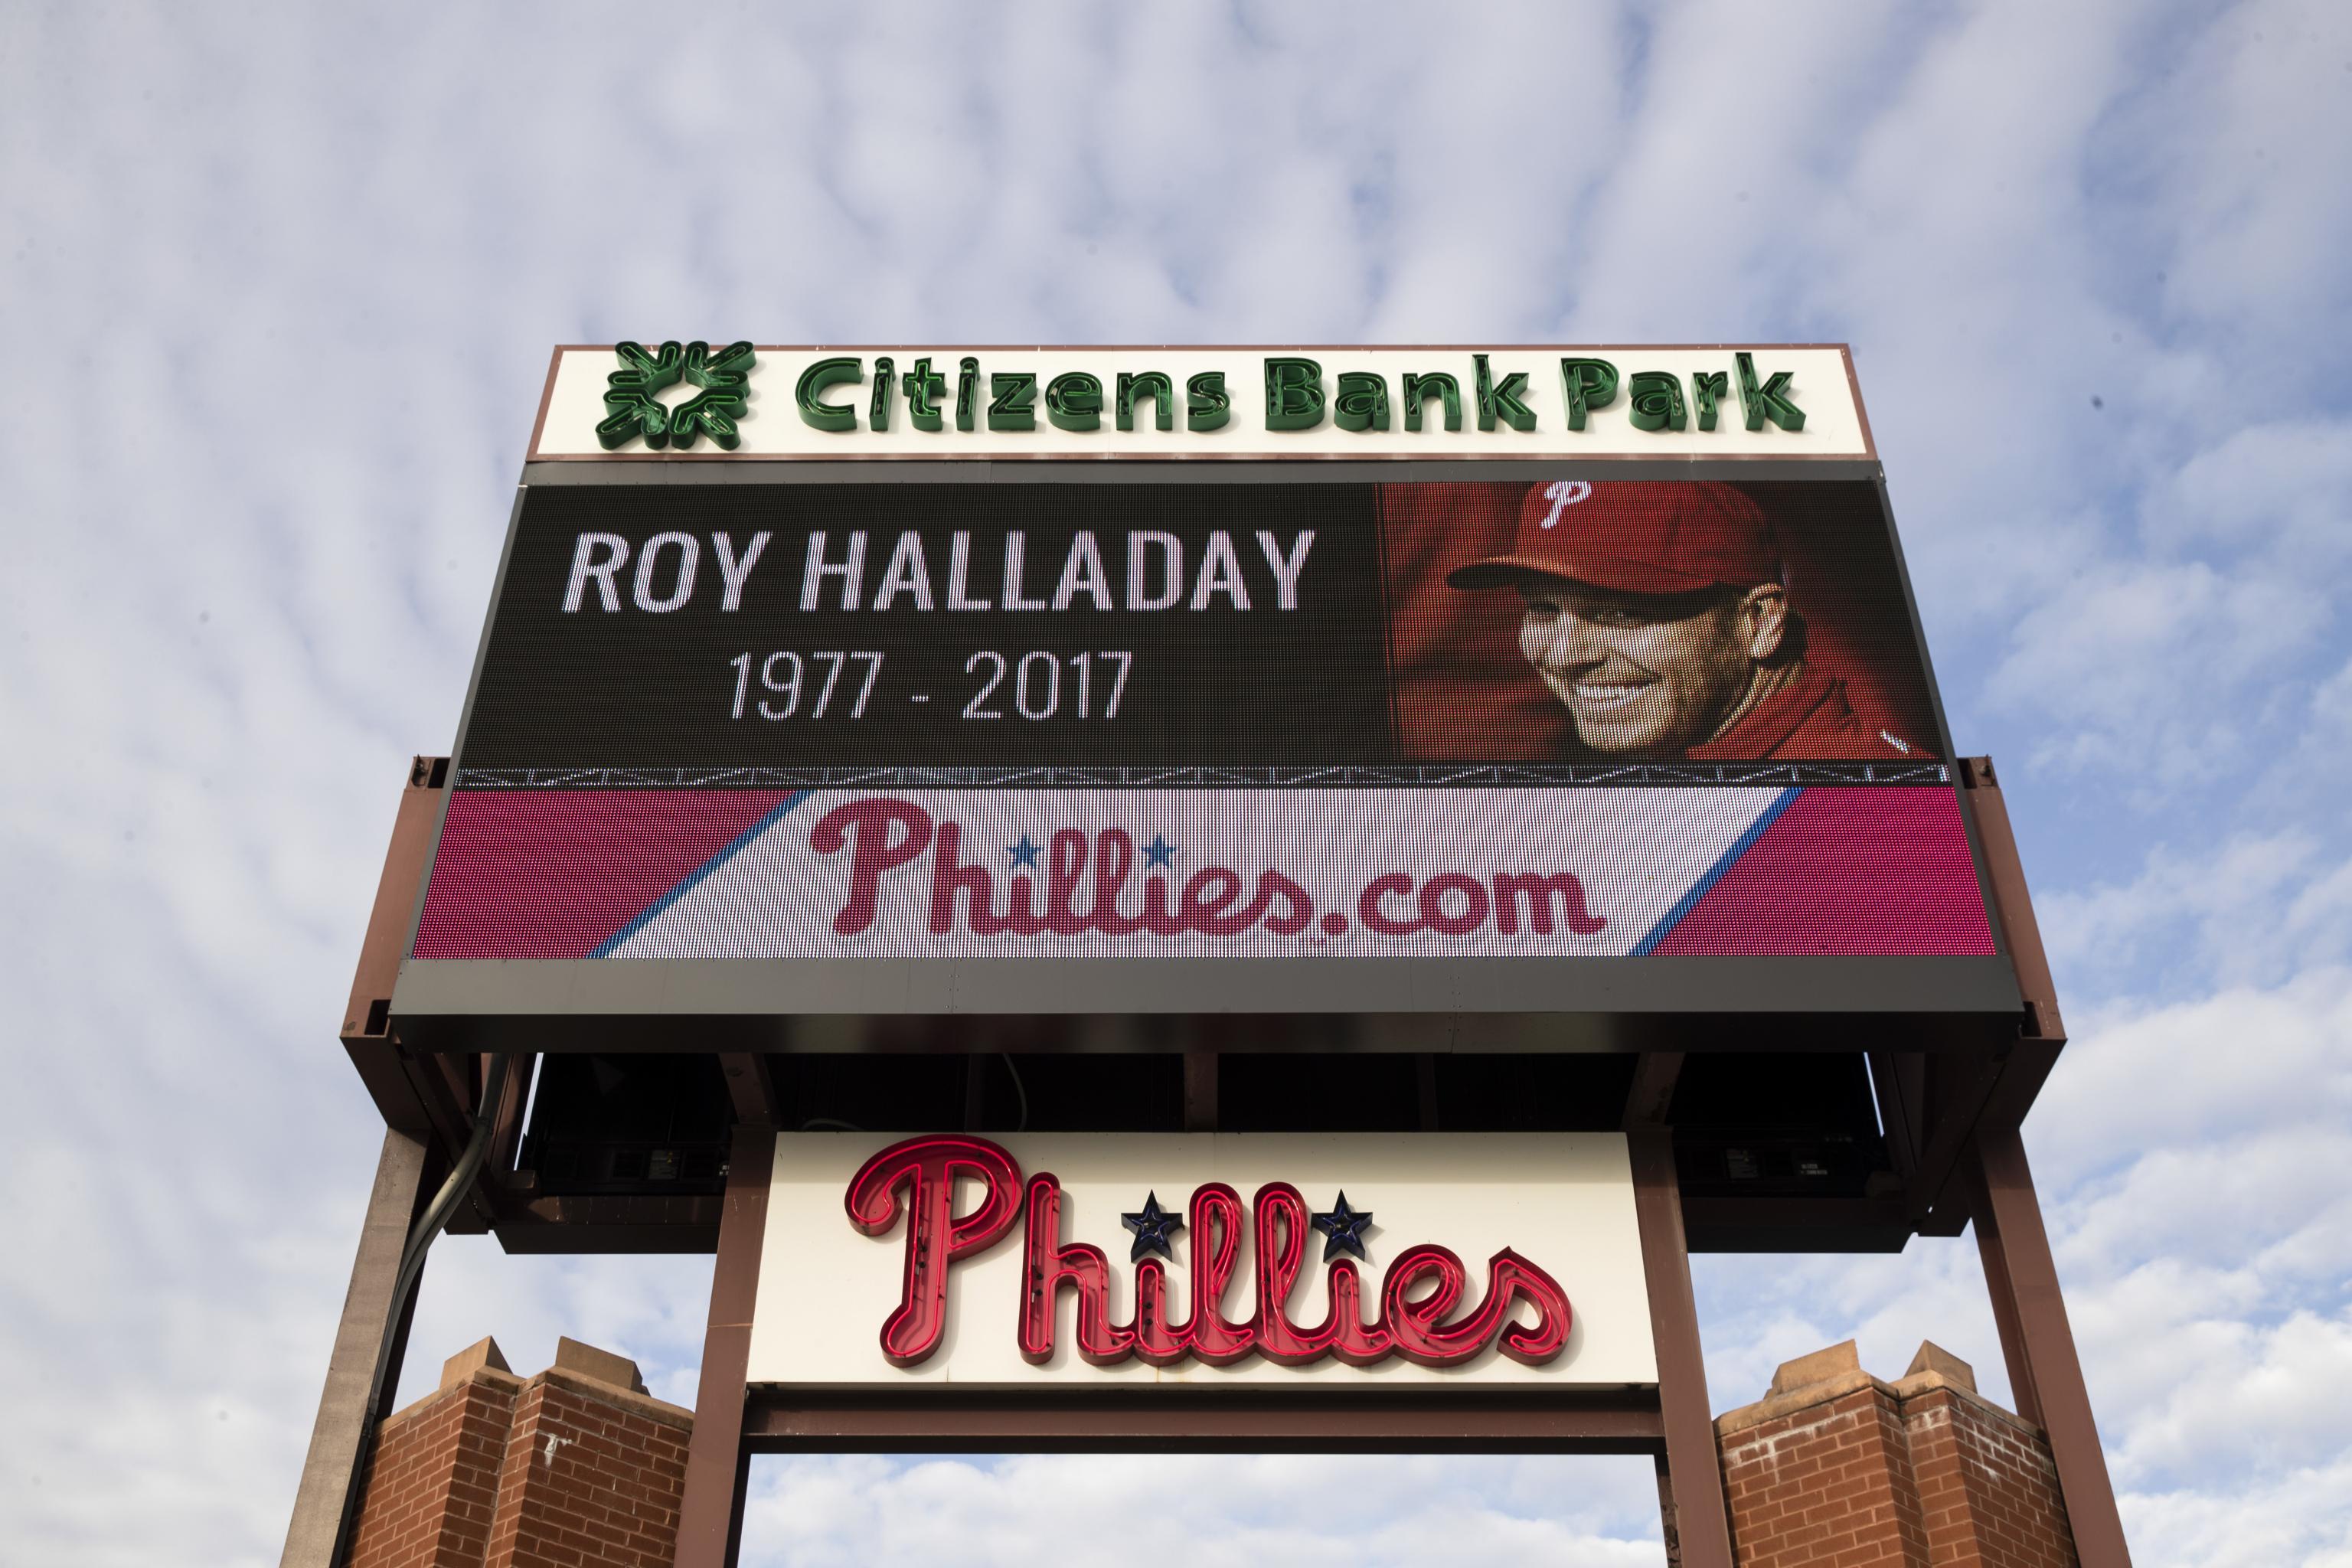 Roy Halladay's plane flew low before crash, which is a 'recipe for  disaster